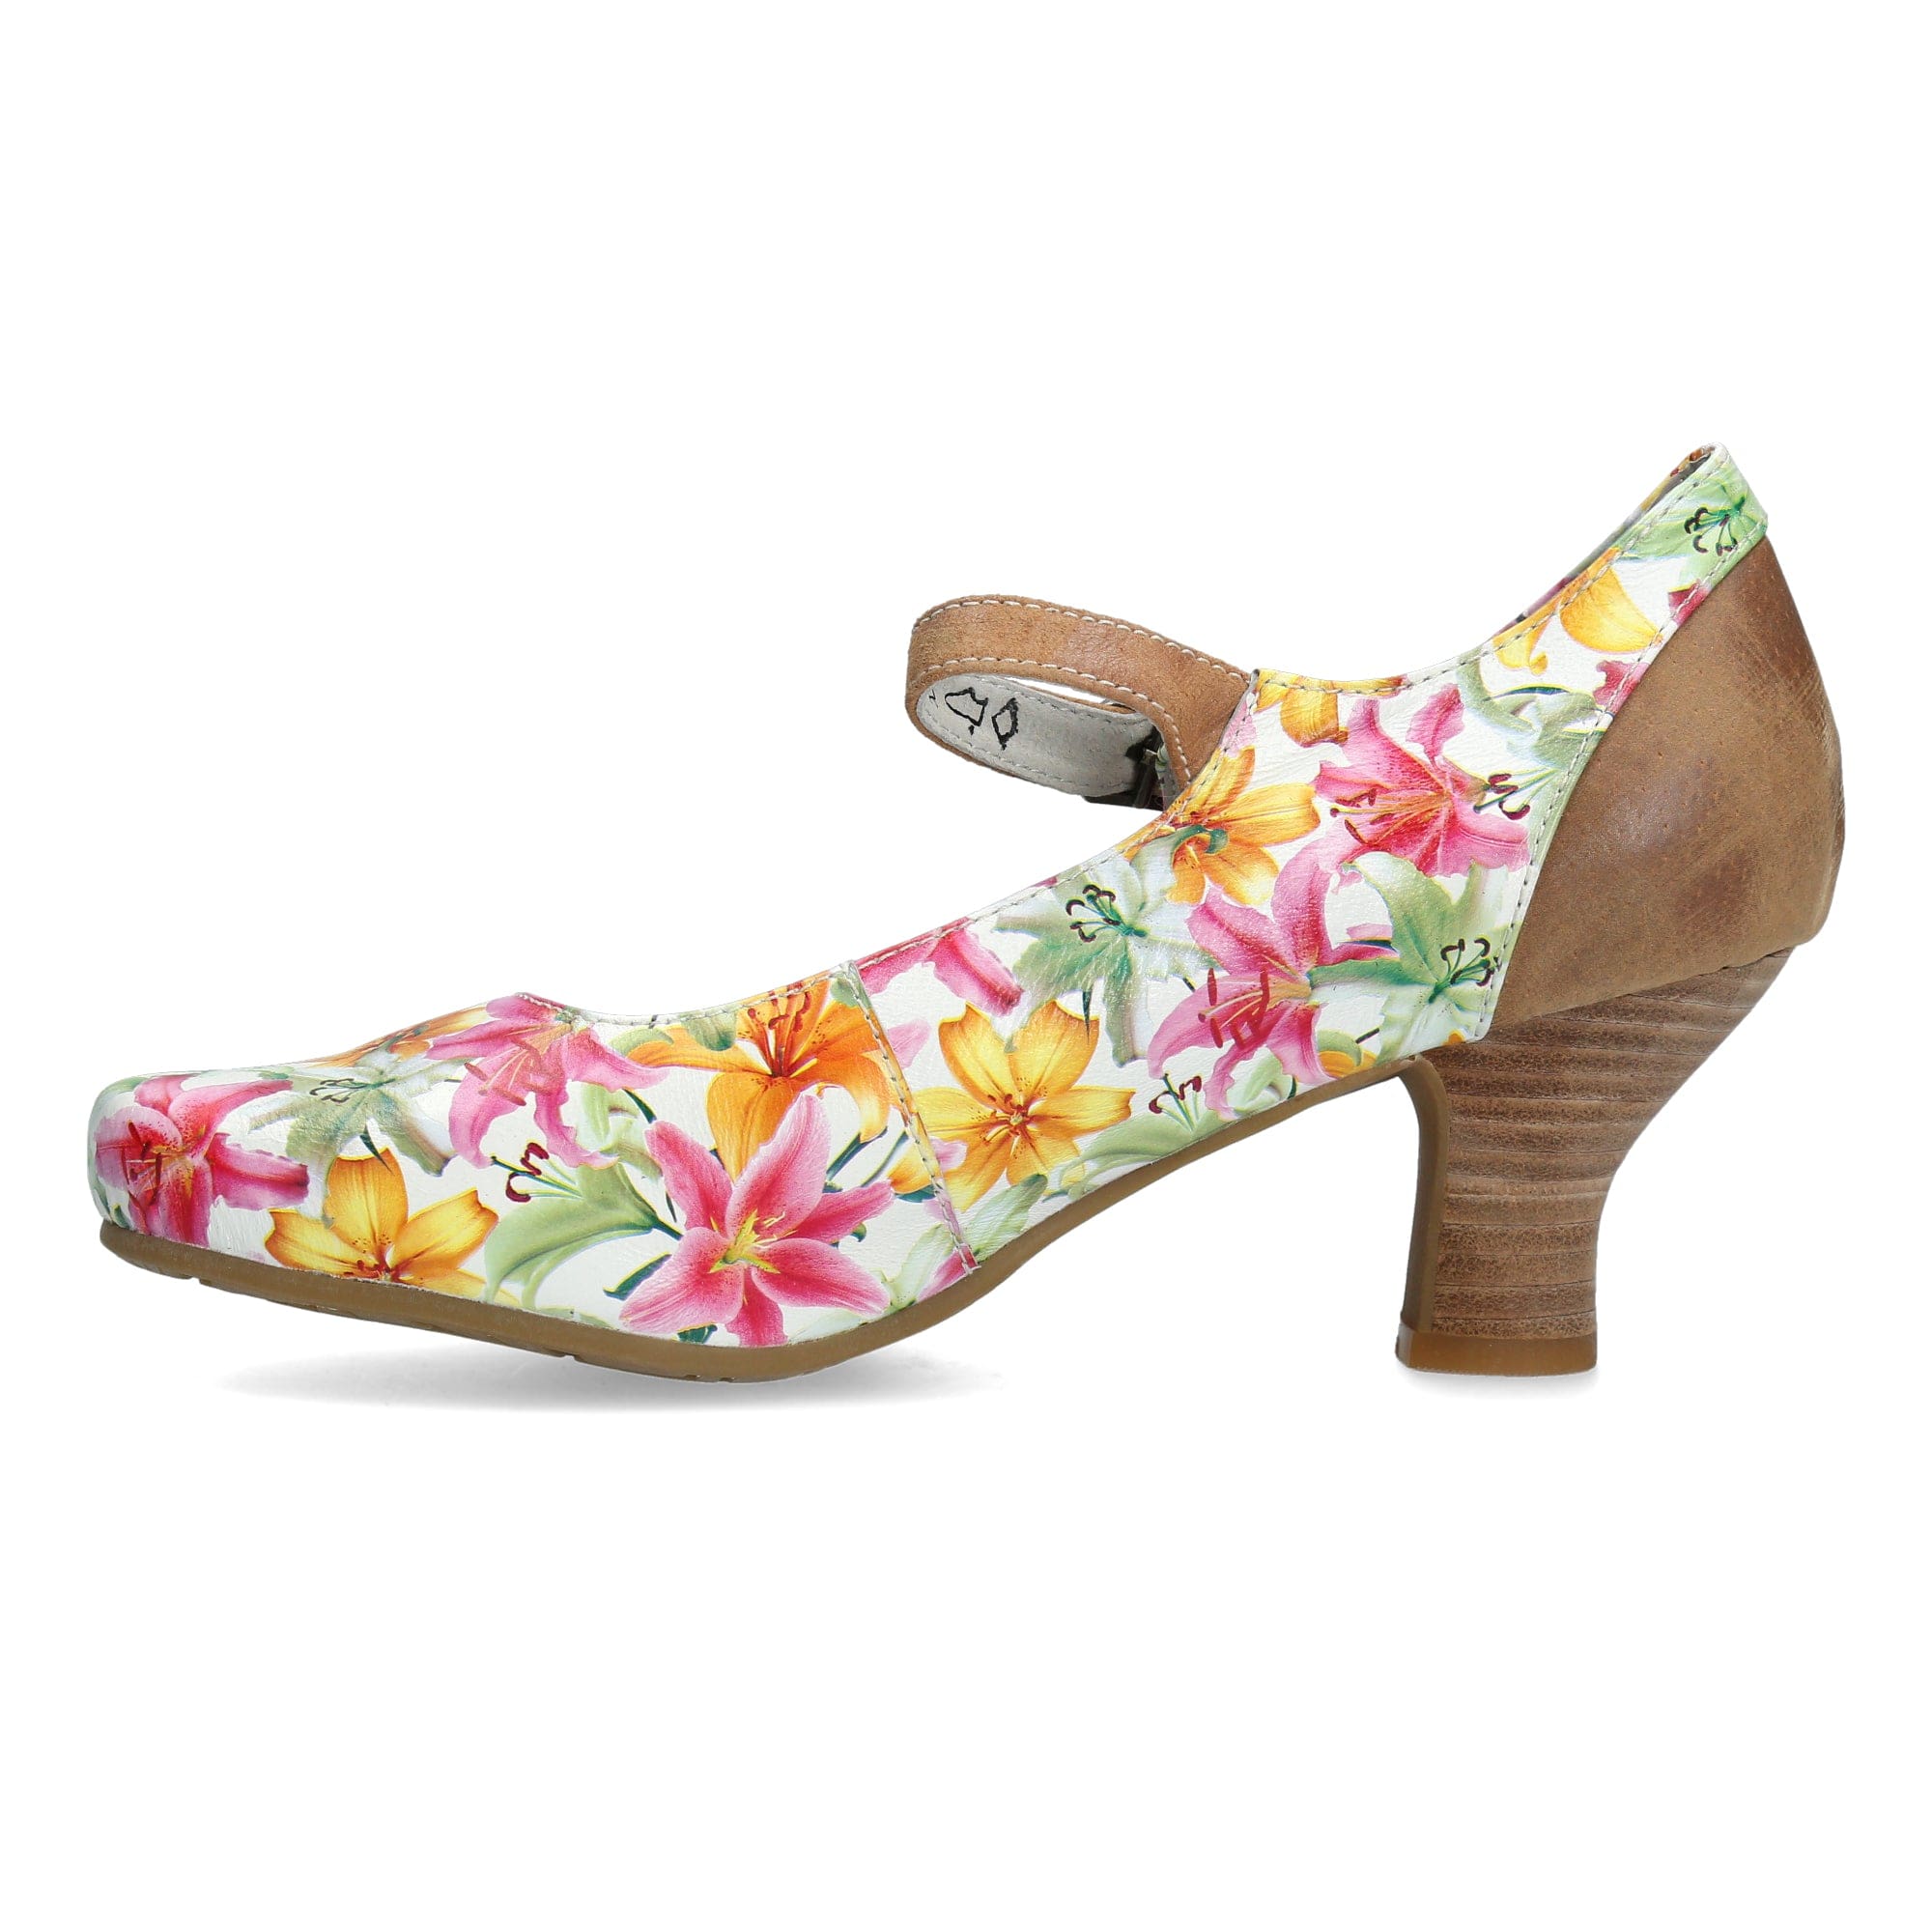 CANDICE 12 Shoes - Anise / 40 - Pump